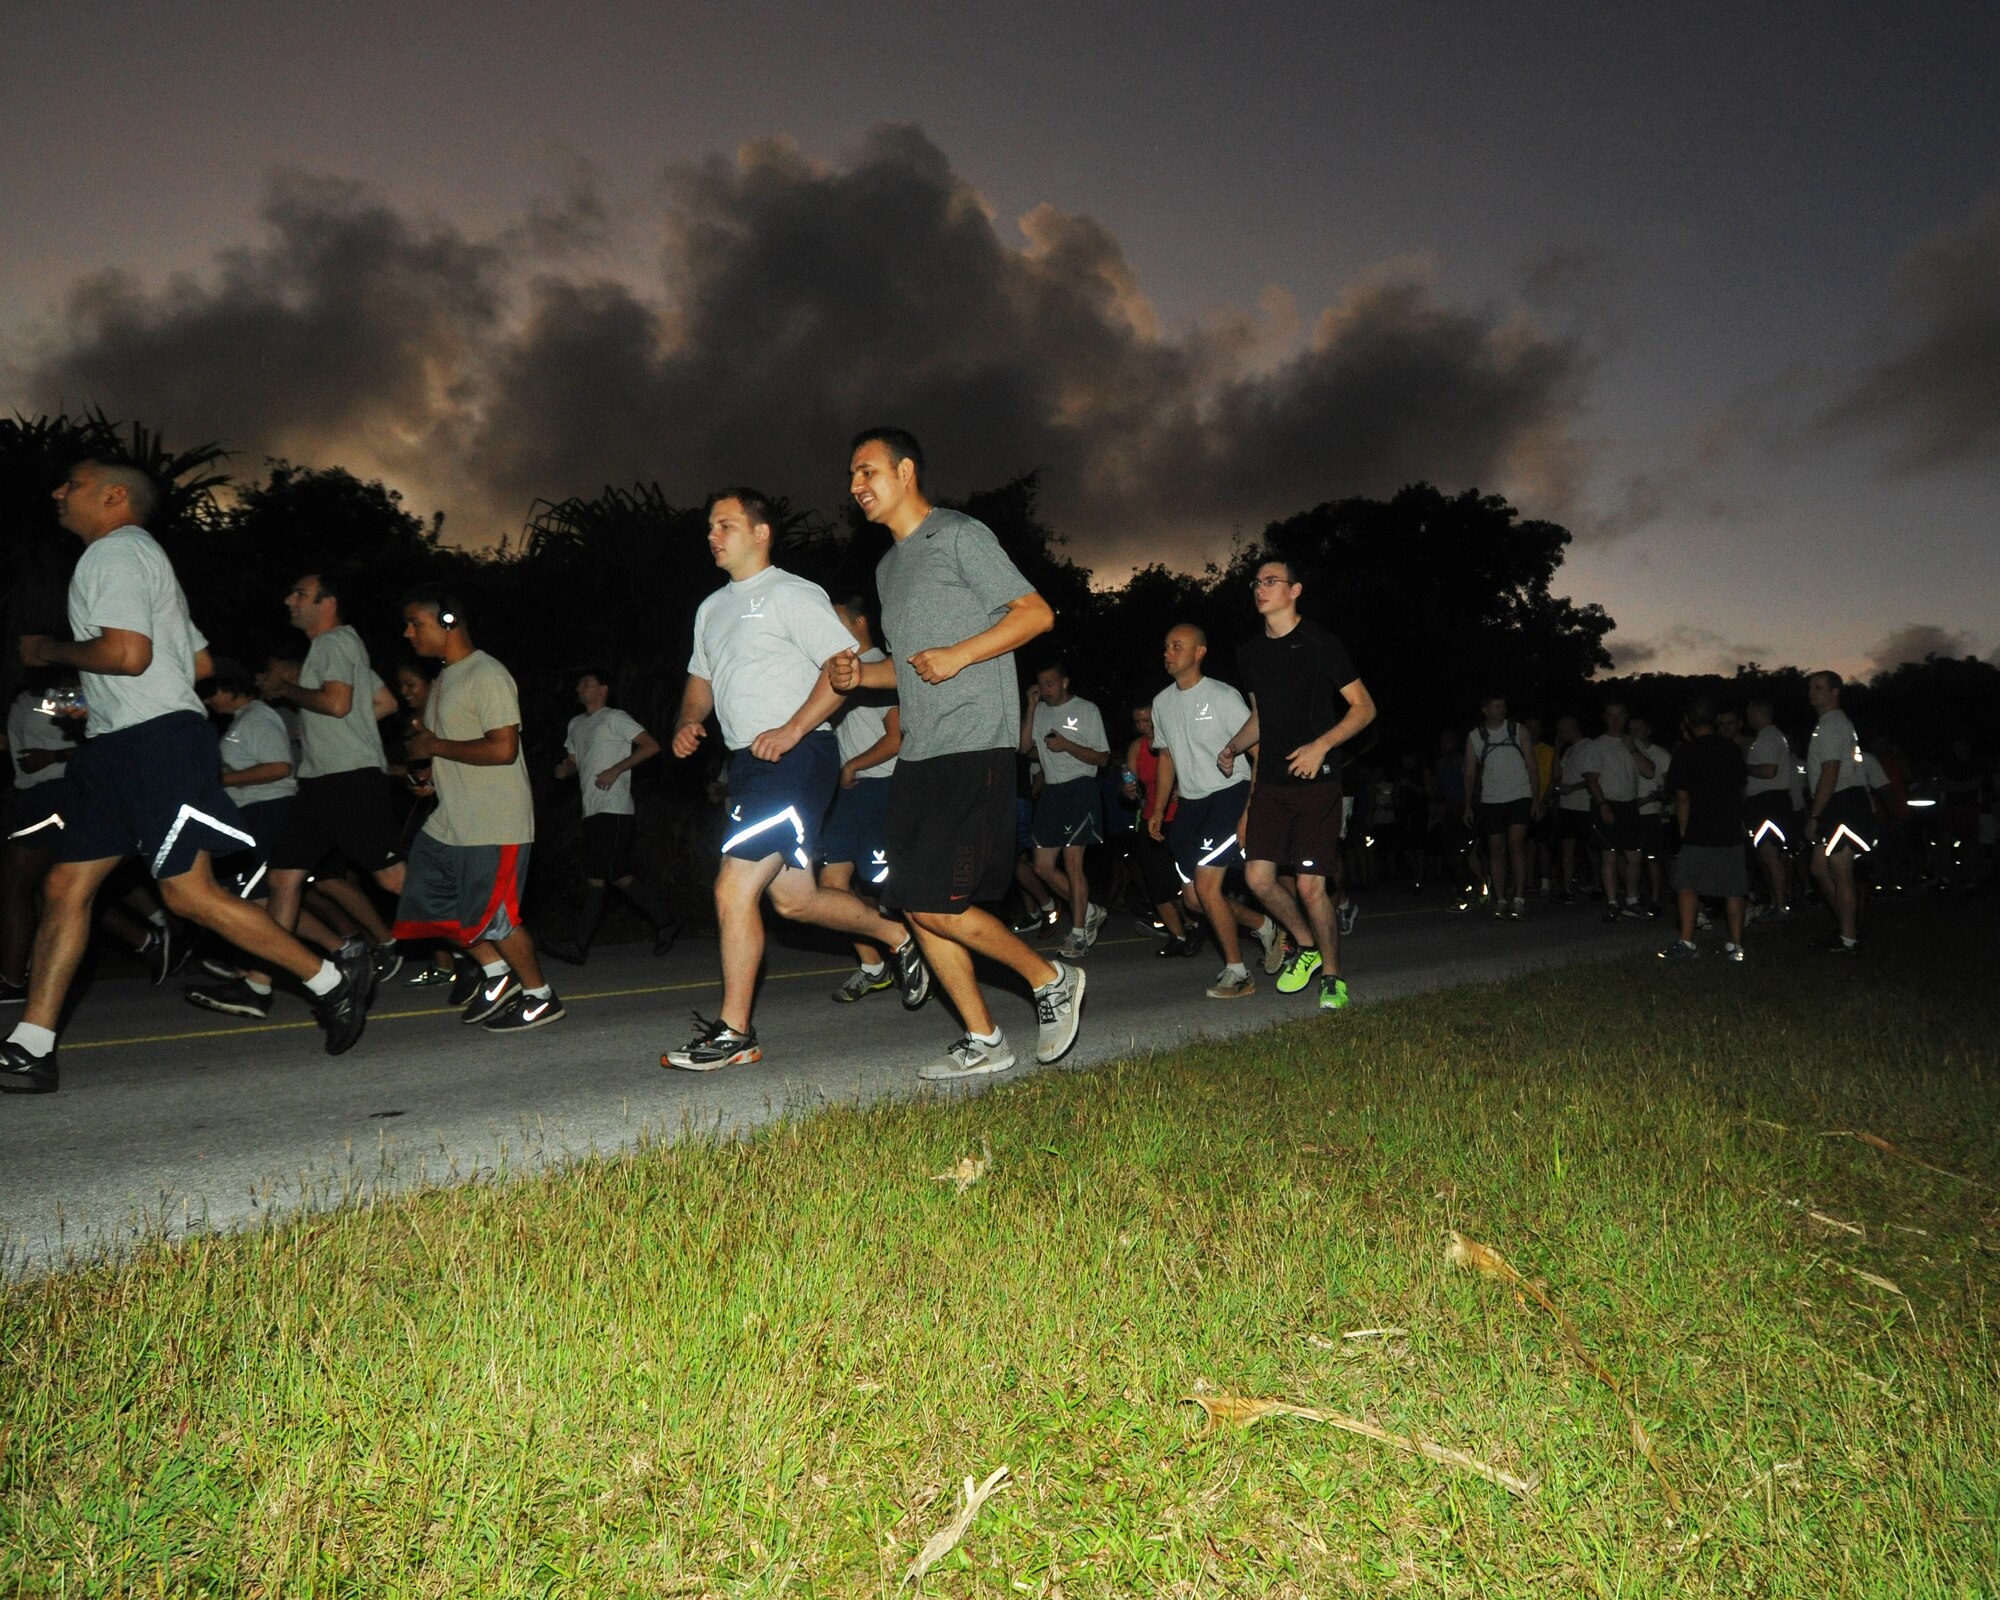 Members of Team Andersen start running in the Sanders Slaughter Run, on Andersen Air Force Base, Guam, Jan. 8, 2014. More than 250 participants ran in the base’s first group run of the year, hosted by the 36th Force Support Squadron. (U.S. Air Force photo by Senior Airman Cierra Presentado/Released)